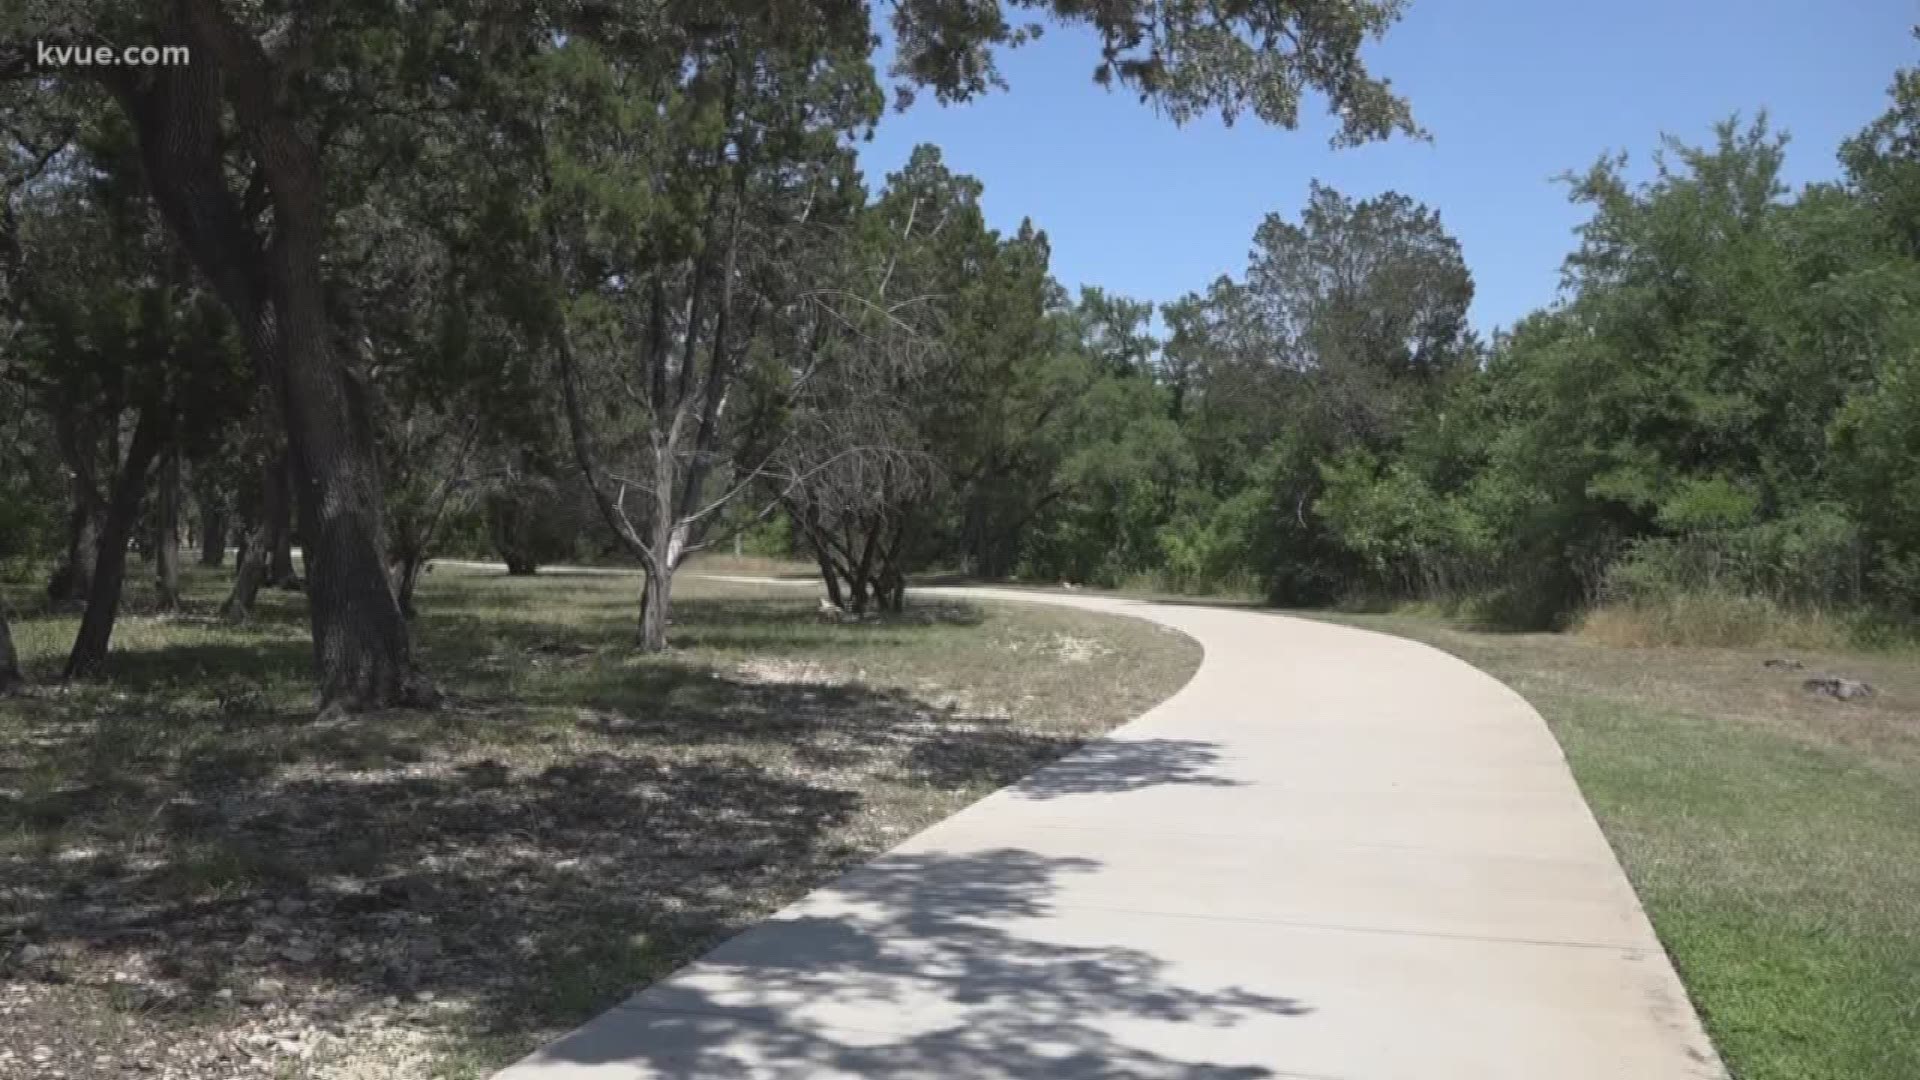 Round Rock police are searching for a suspect who they say assaulted a woman while she was running along the Brushy Creek Trail Sunday morning.